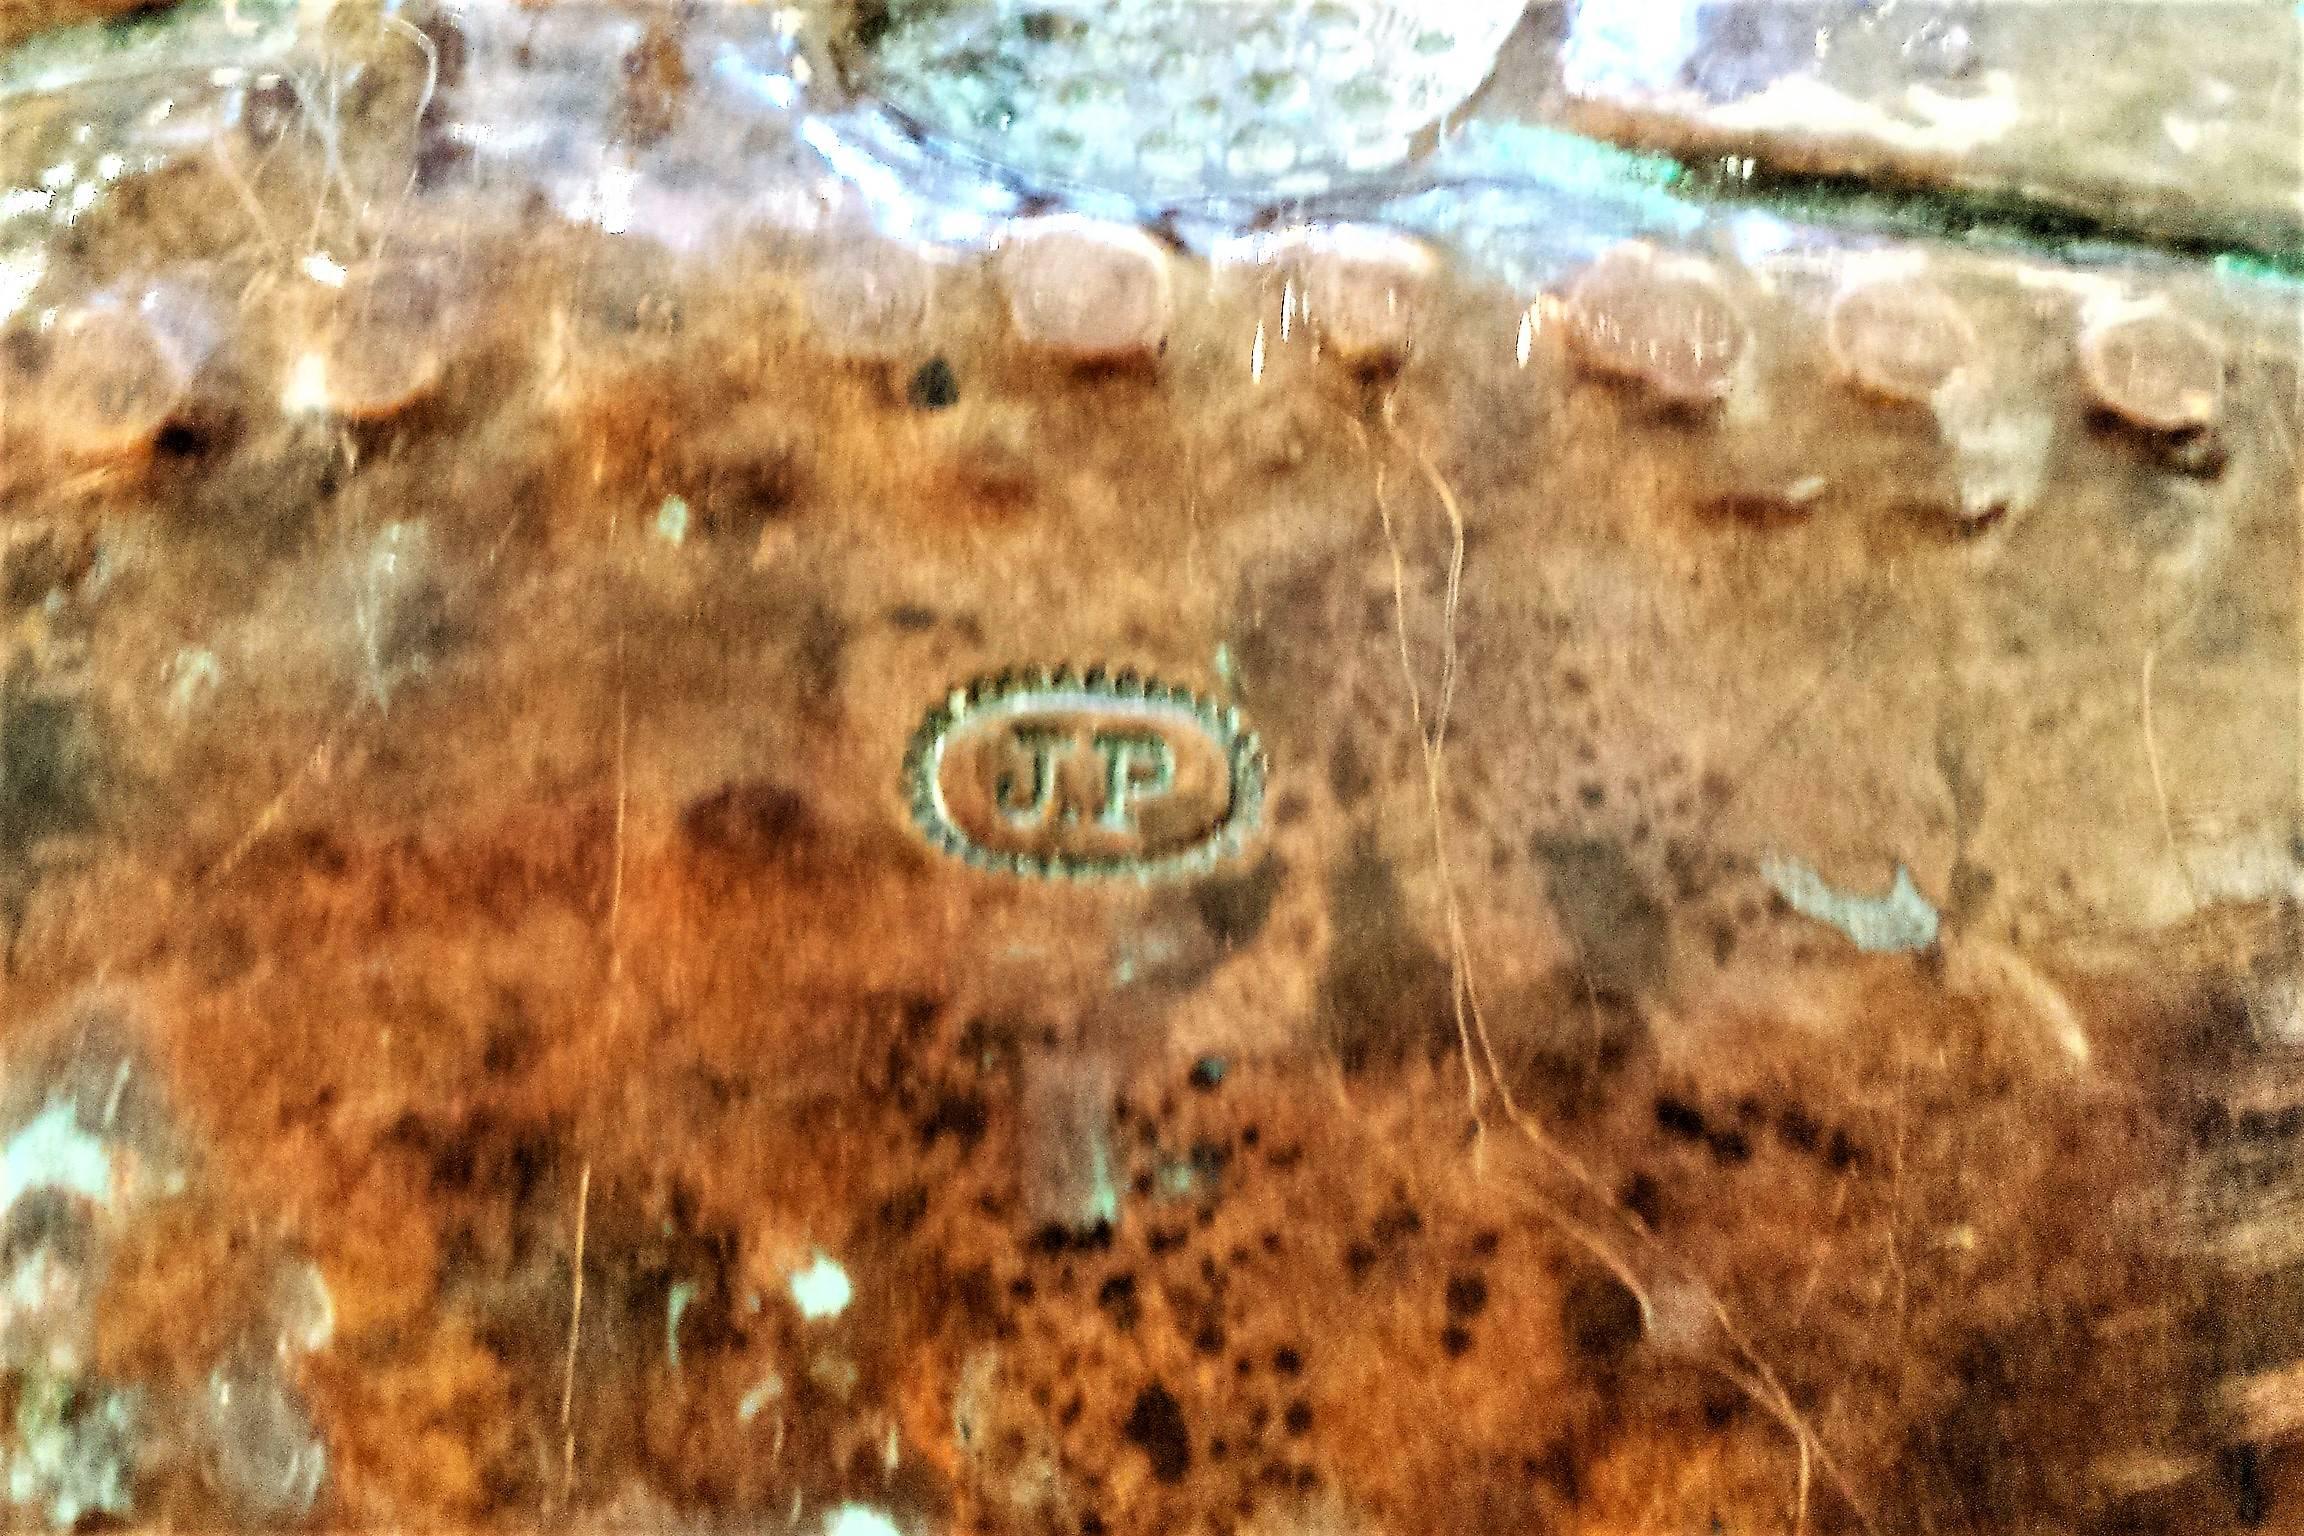 A Classic piece of Arts & Crafts copper reposse work with a leaves and acorns motif to the border of the tray, and pleasing patination. Marked 'JP'.
John Pearson was a founding member with C R Ashbee of the Guild of Handicraft before playing a key